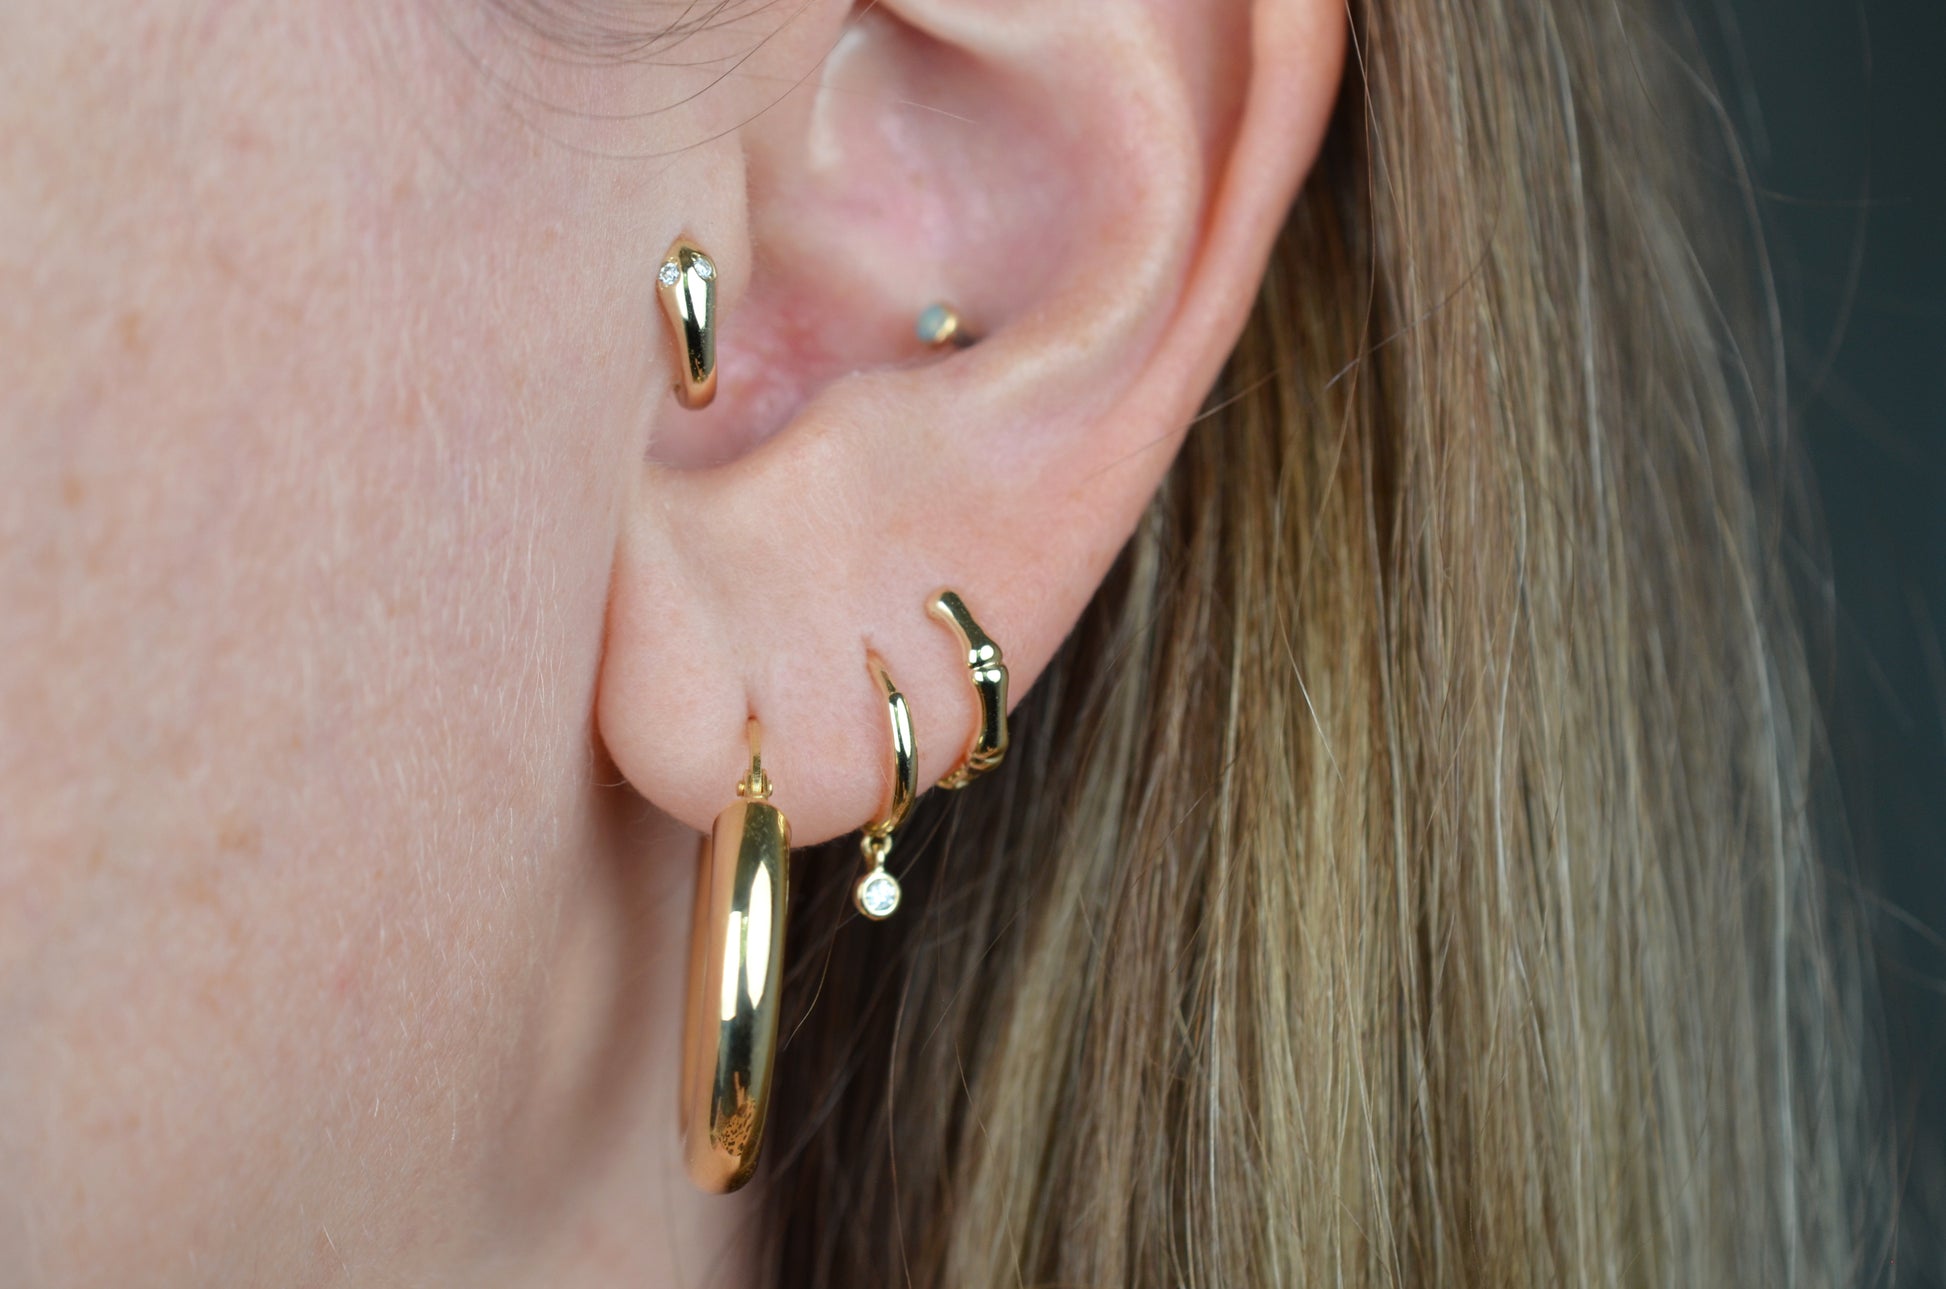 the featured hoops are shown on a caucasian model's first lobe piercing. also visible are a snug gold hoop with dangling diamond in the second piercing, a snug gold hoop stylized as bamboo in the third piercing, and a snug gold hoop stylized as a snake with diamond eyes in the tragus piercing.